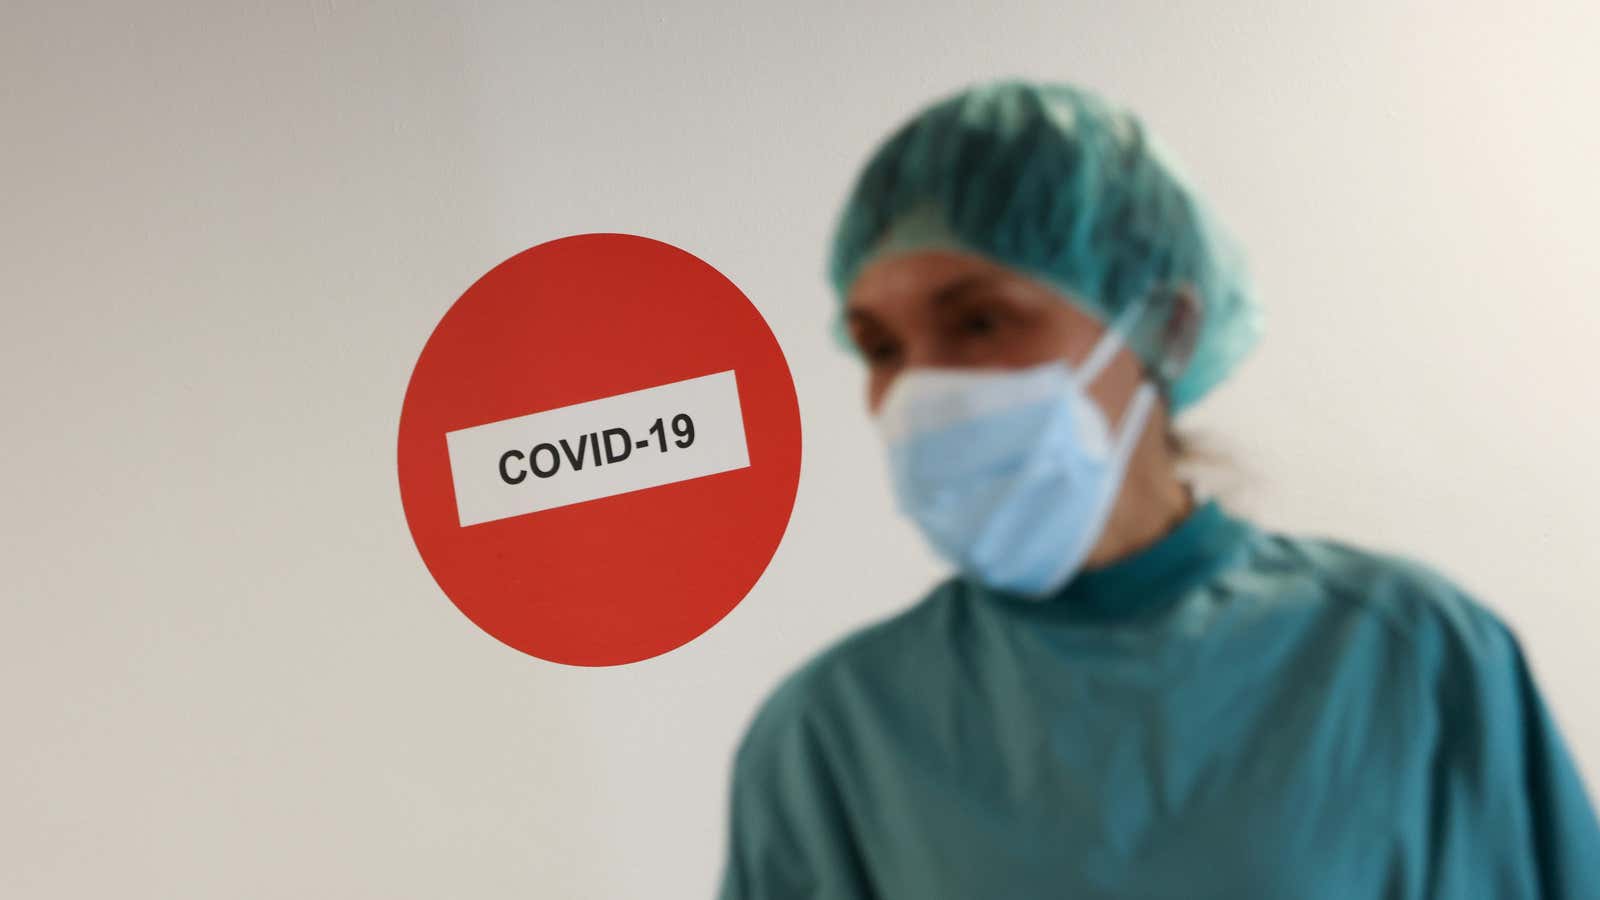 People suffering from long-term effects of Covid-19 face uncertainty about the nature of their symptoms and how long they might last.